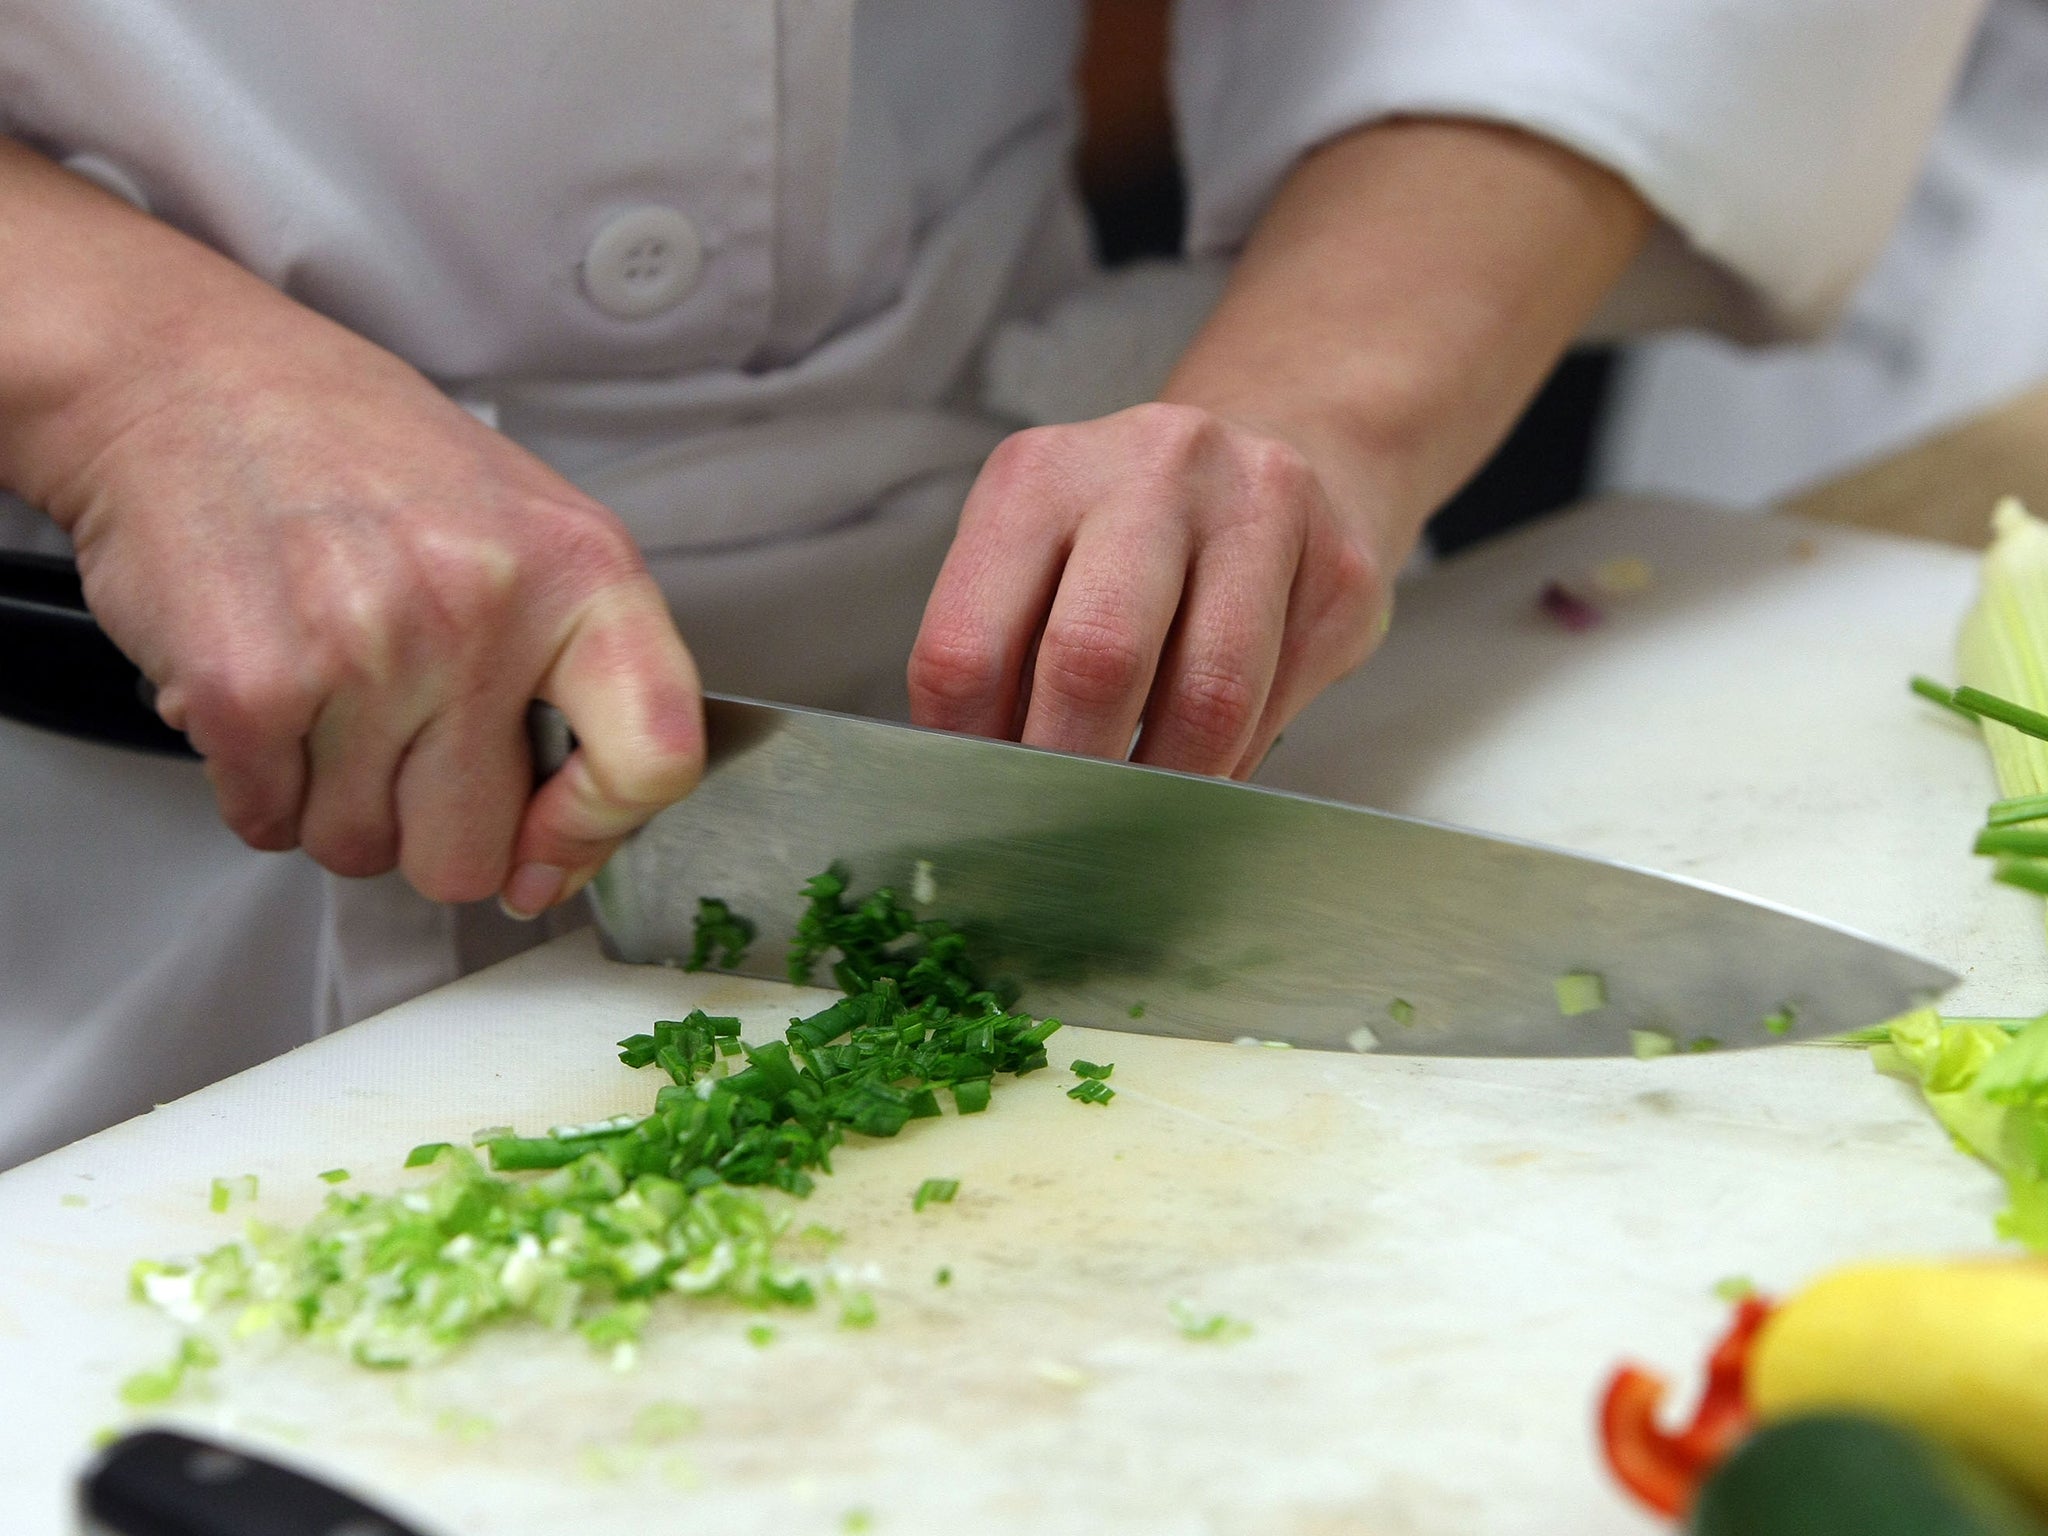 A new GCSE in food and nutrition that aims to teach practical cooking skills